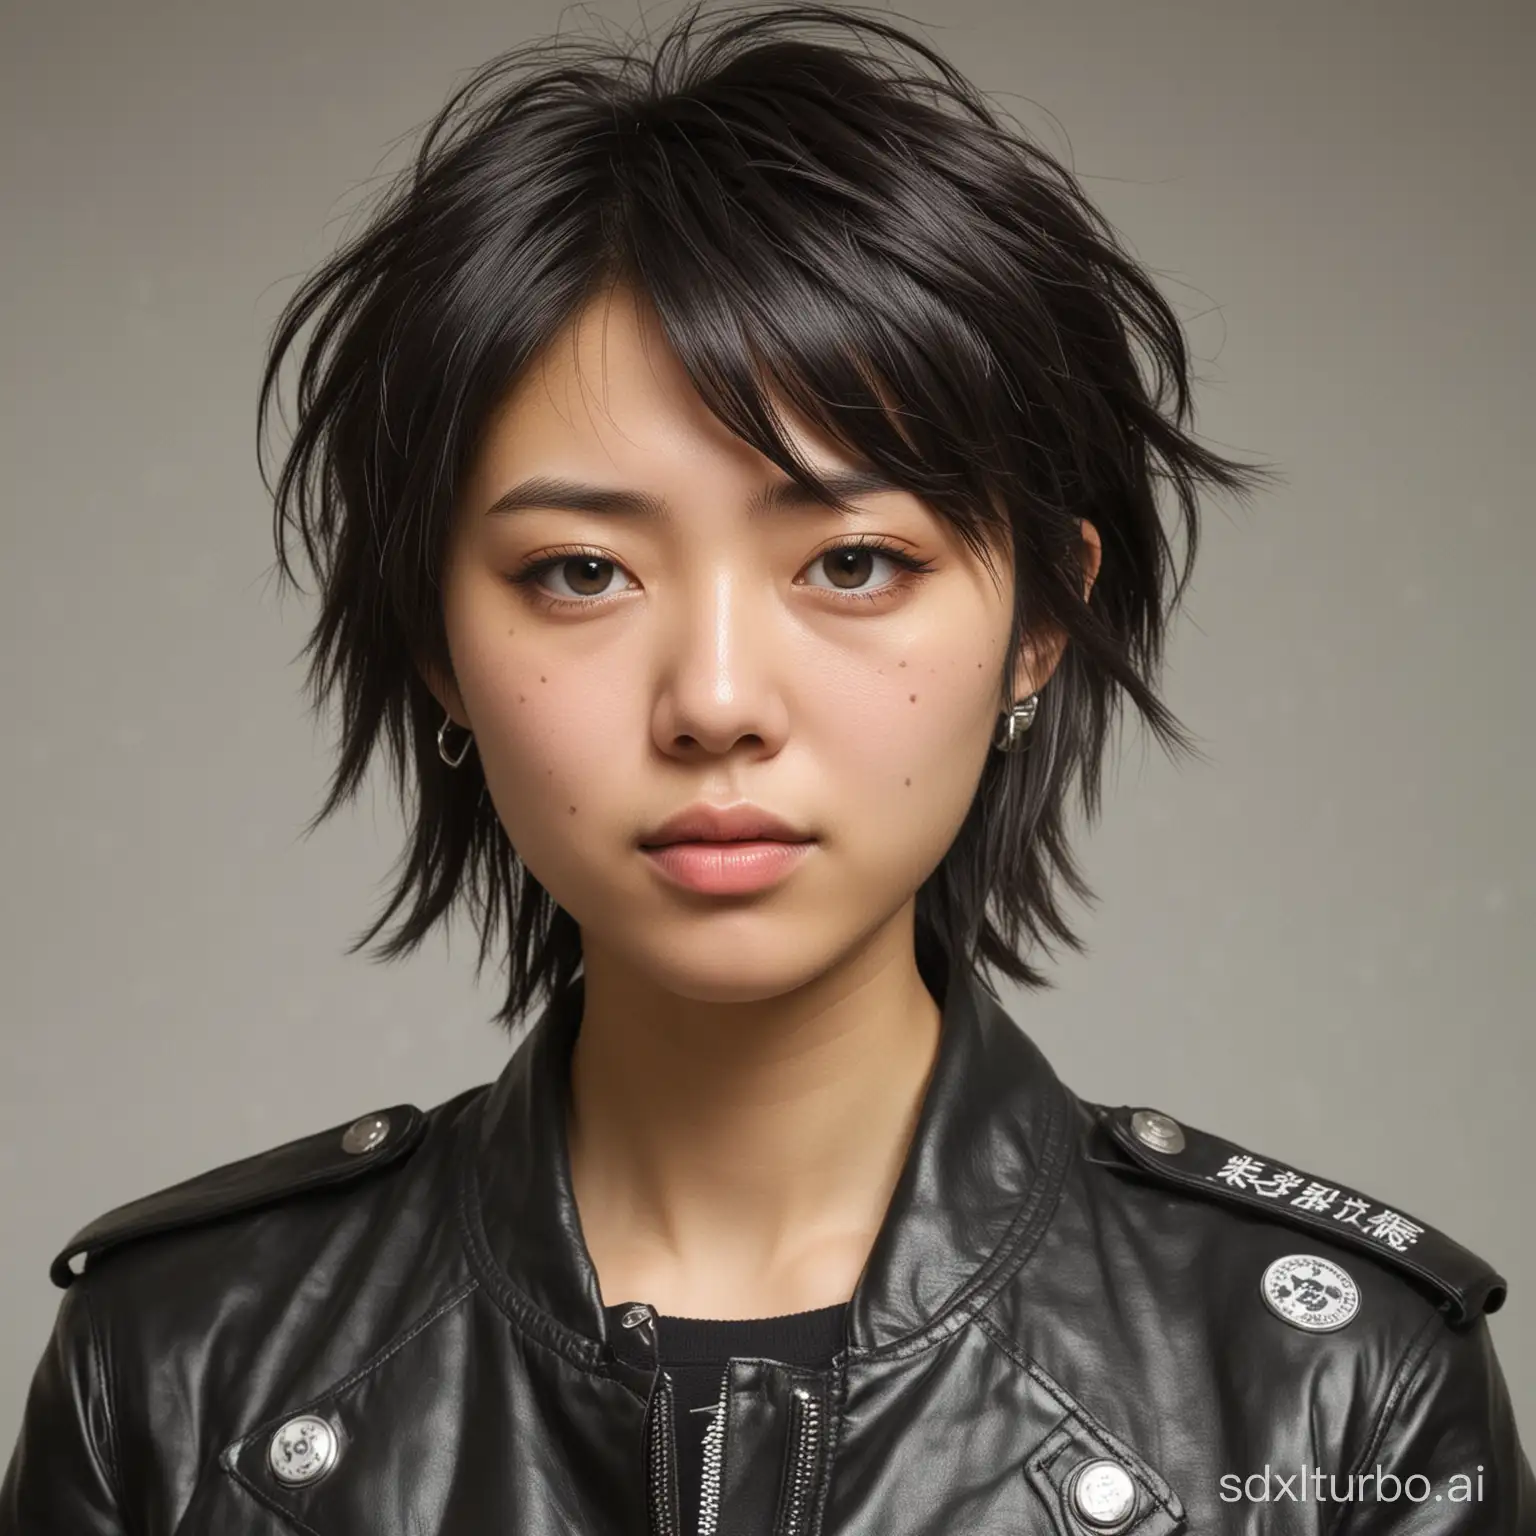 Cleate image Portrait of a young Japanese woman with a short, tousled hairstyle, wearing a leather jacket with punk badges.	looking at viewer,Japanese beauty woman close-up photos of realistic real people taken before the age of 25,ultra-detailed face	not worst quality,not ugly,not bad anatomy,not jpeg artifacts,not bad hands,not missing limb,not ugly face,not bad face,not missing_limb,not sketch,not oil painting,not watercolor,not monochrome,not flat color,not flat shading,not retro style,not ink,not multiple people,not male ,not extra digit,not Many arms,not Too many legs, not worst quality,not ugly,not bad anatomy,not jpeg artifacts,not bad hands,not missing limb,not ugly face,not bad face,not missing_limb,not sketch,not oil painting,not watercolor,not monochrome,not flat color,not flat shading,not retro style,not ink,not multiple people,not male ,not extra digit,not Many arms,not Too many legs,not long hair,